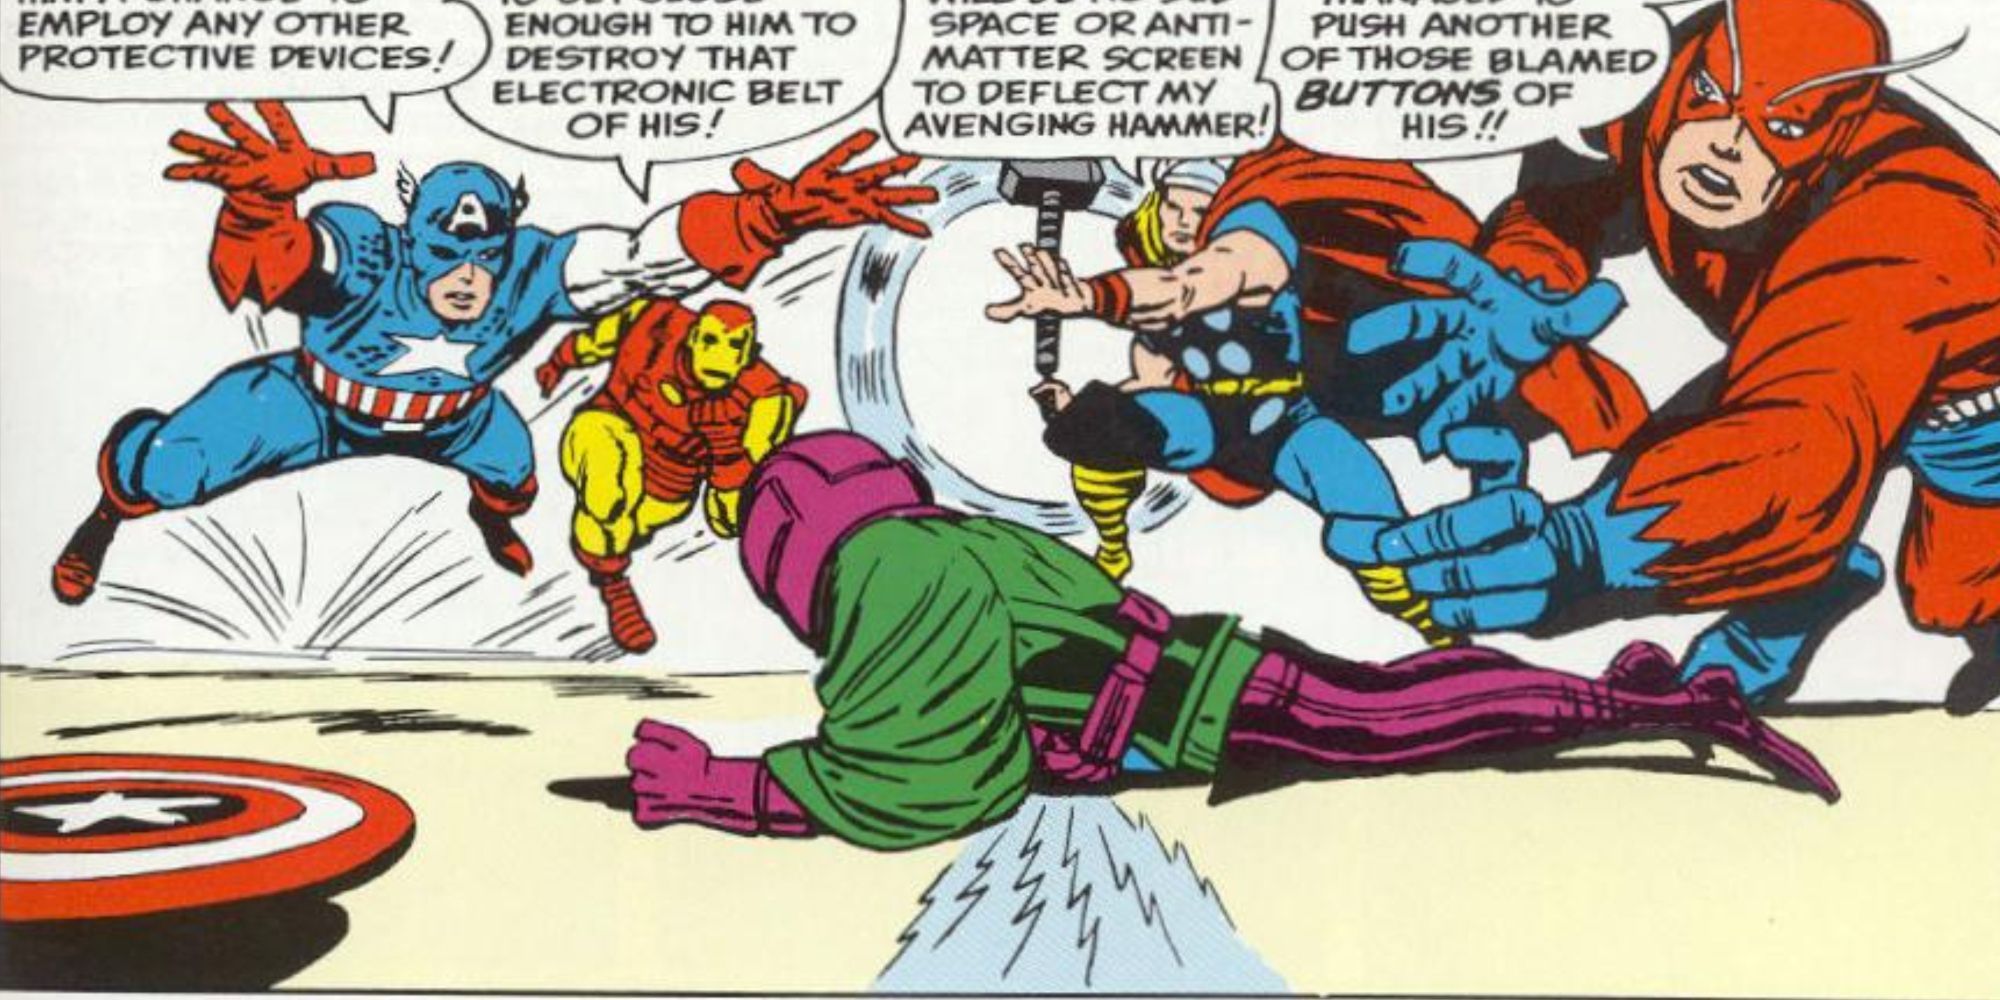 The Avengers attack Kang The Conqueror in Marvel Comics.